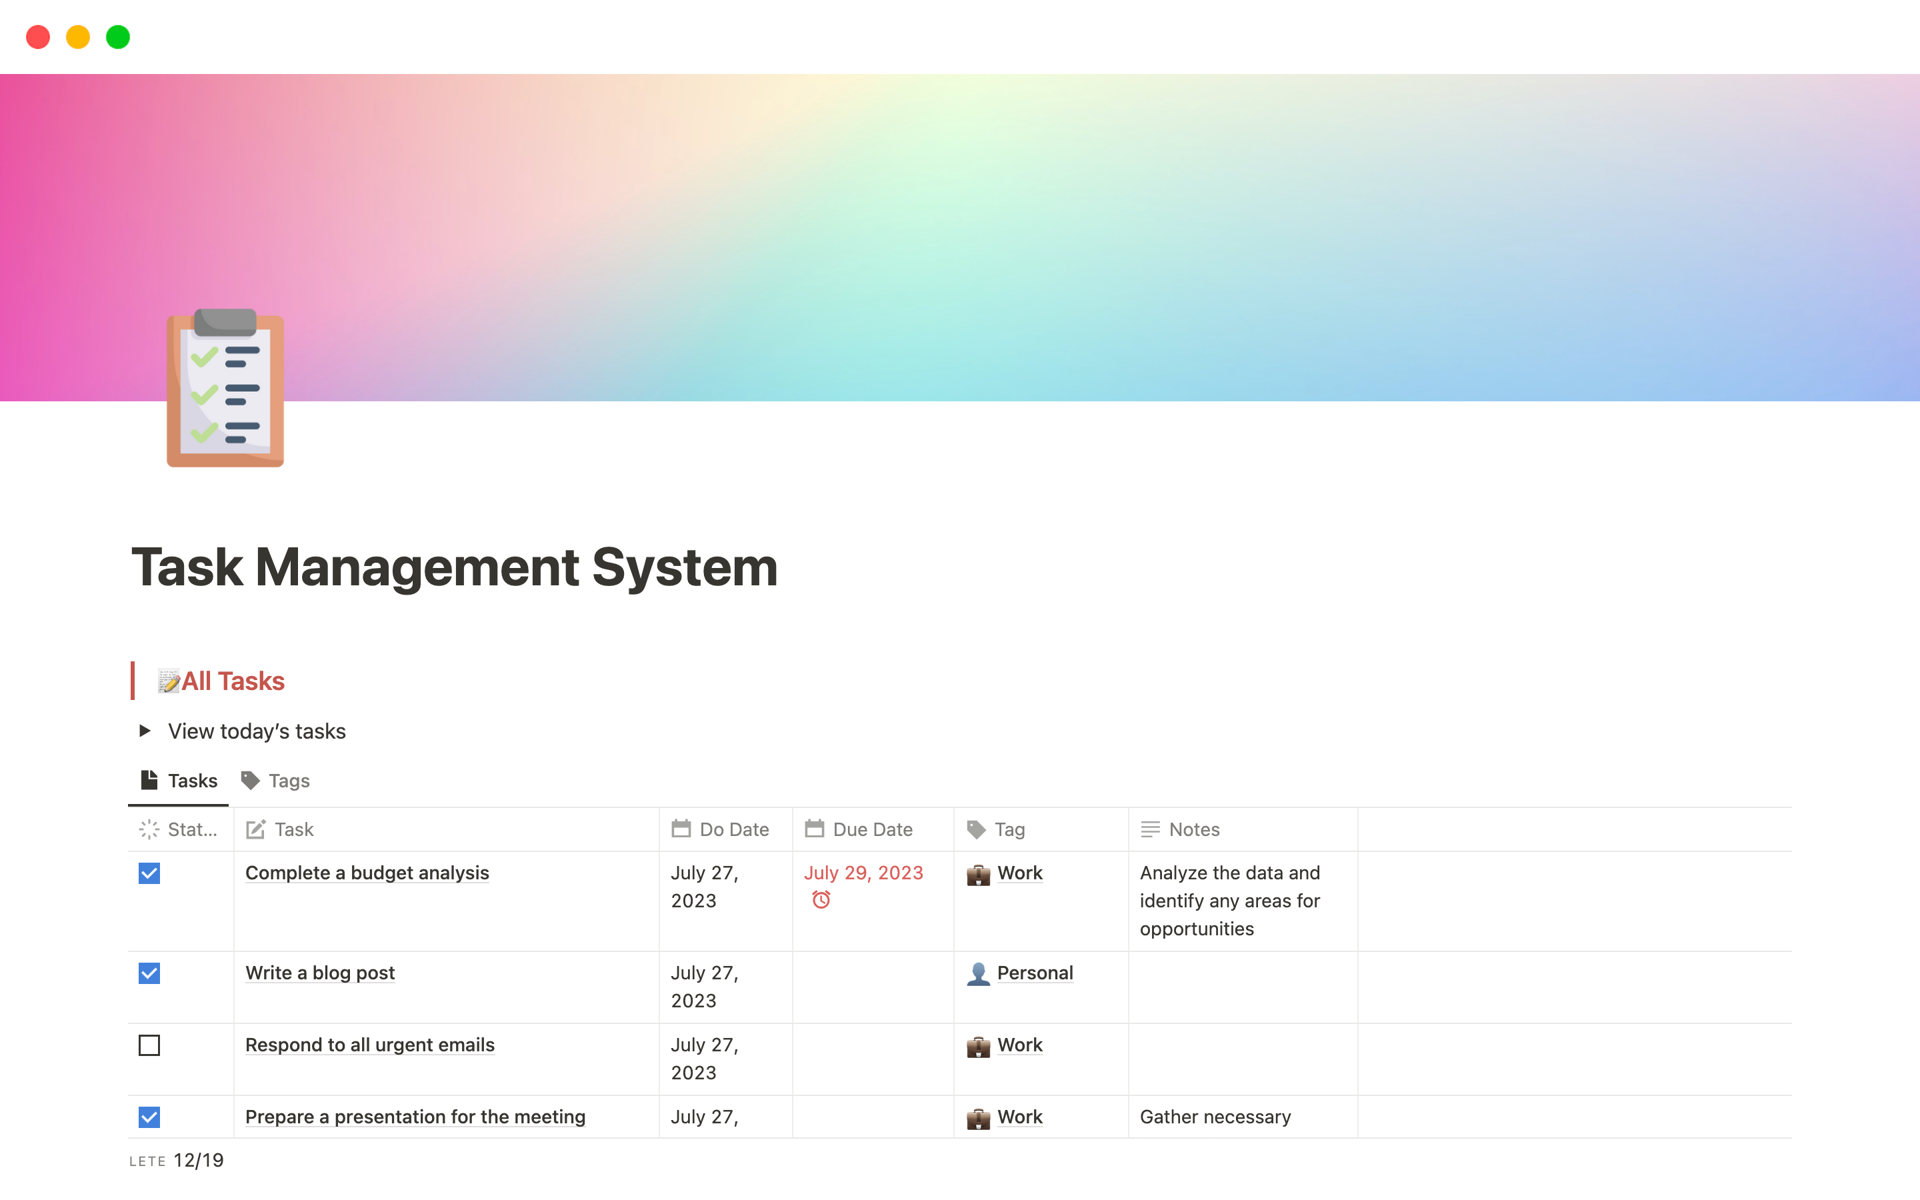 This task management system enables you to manage, organize, and prioritize your tasks with ease.